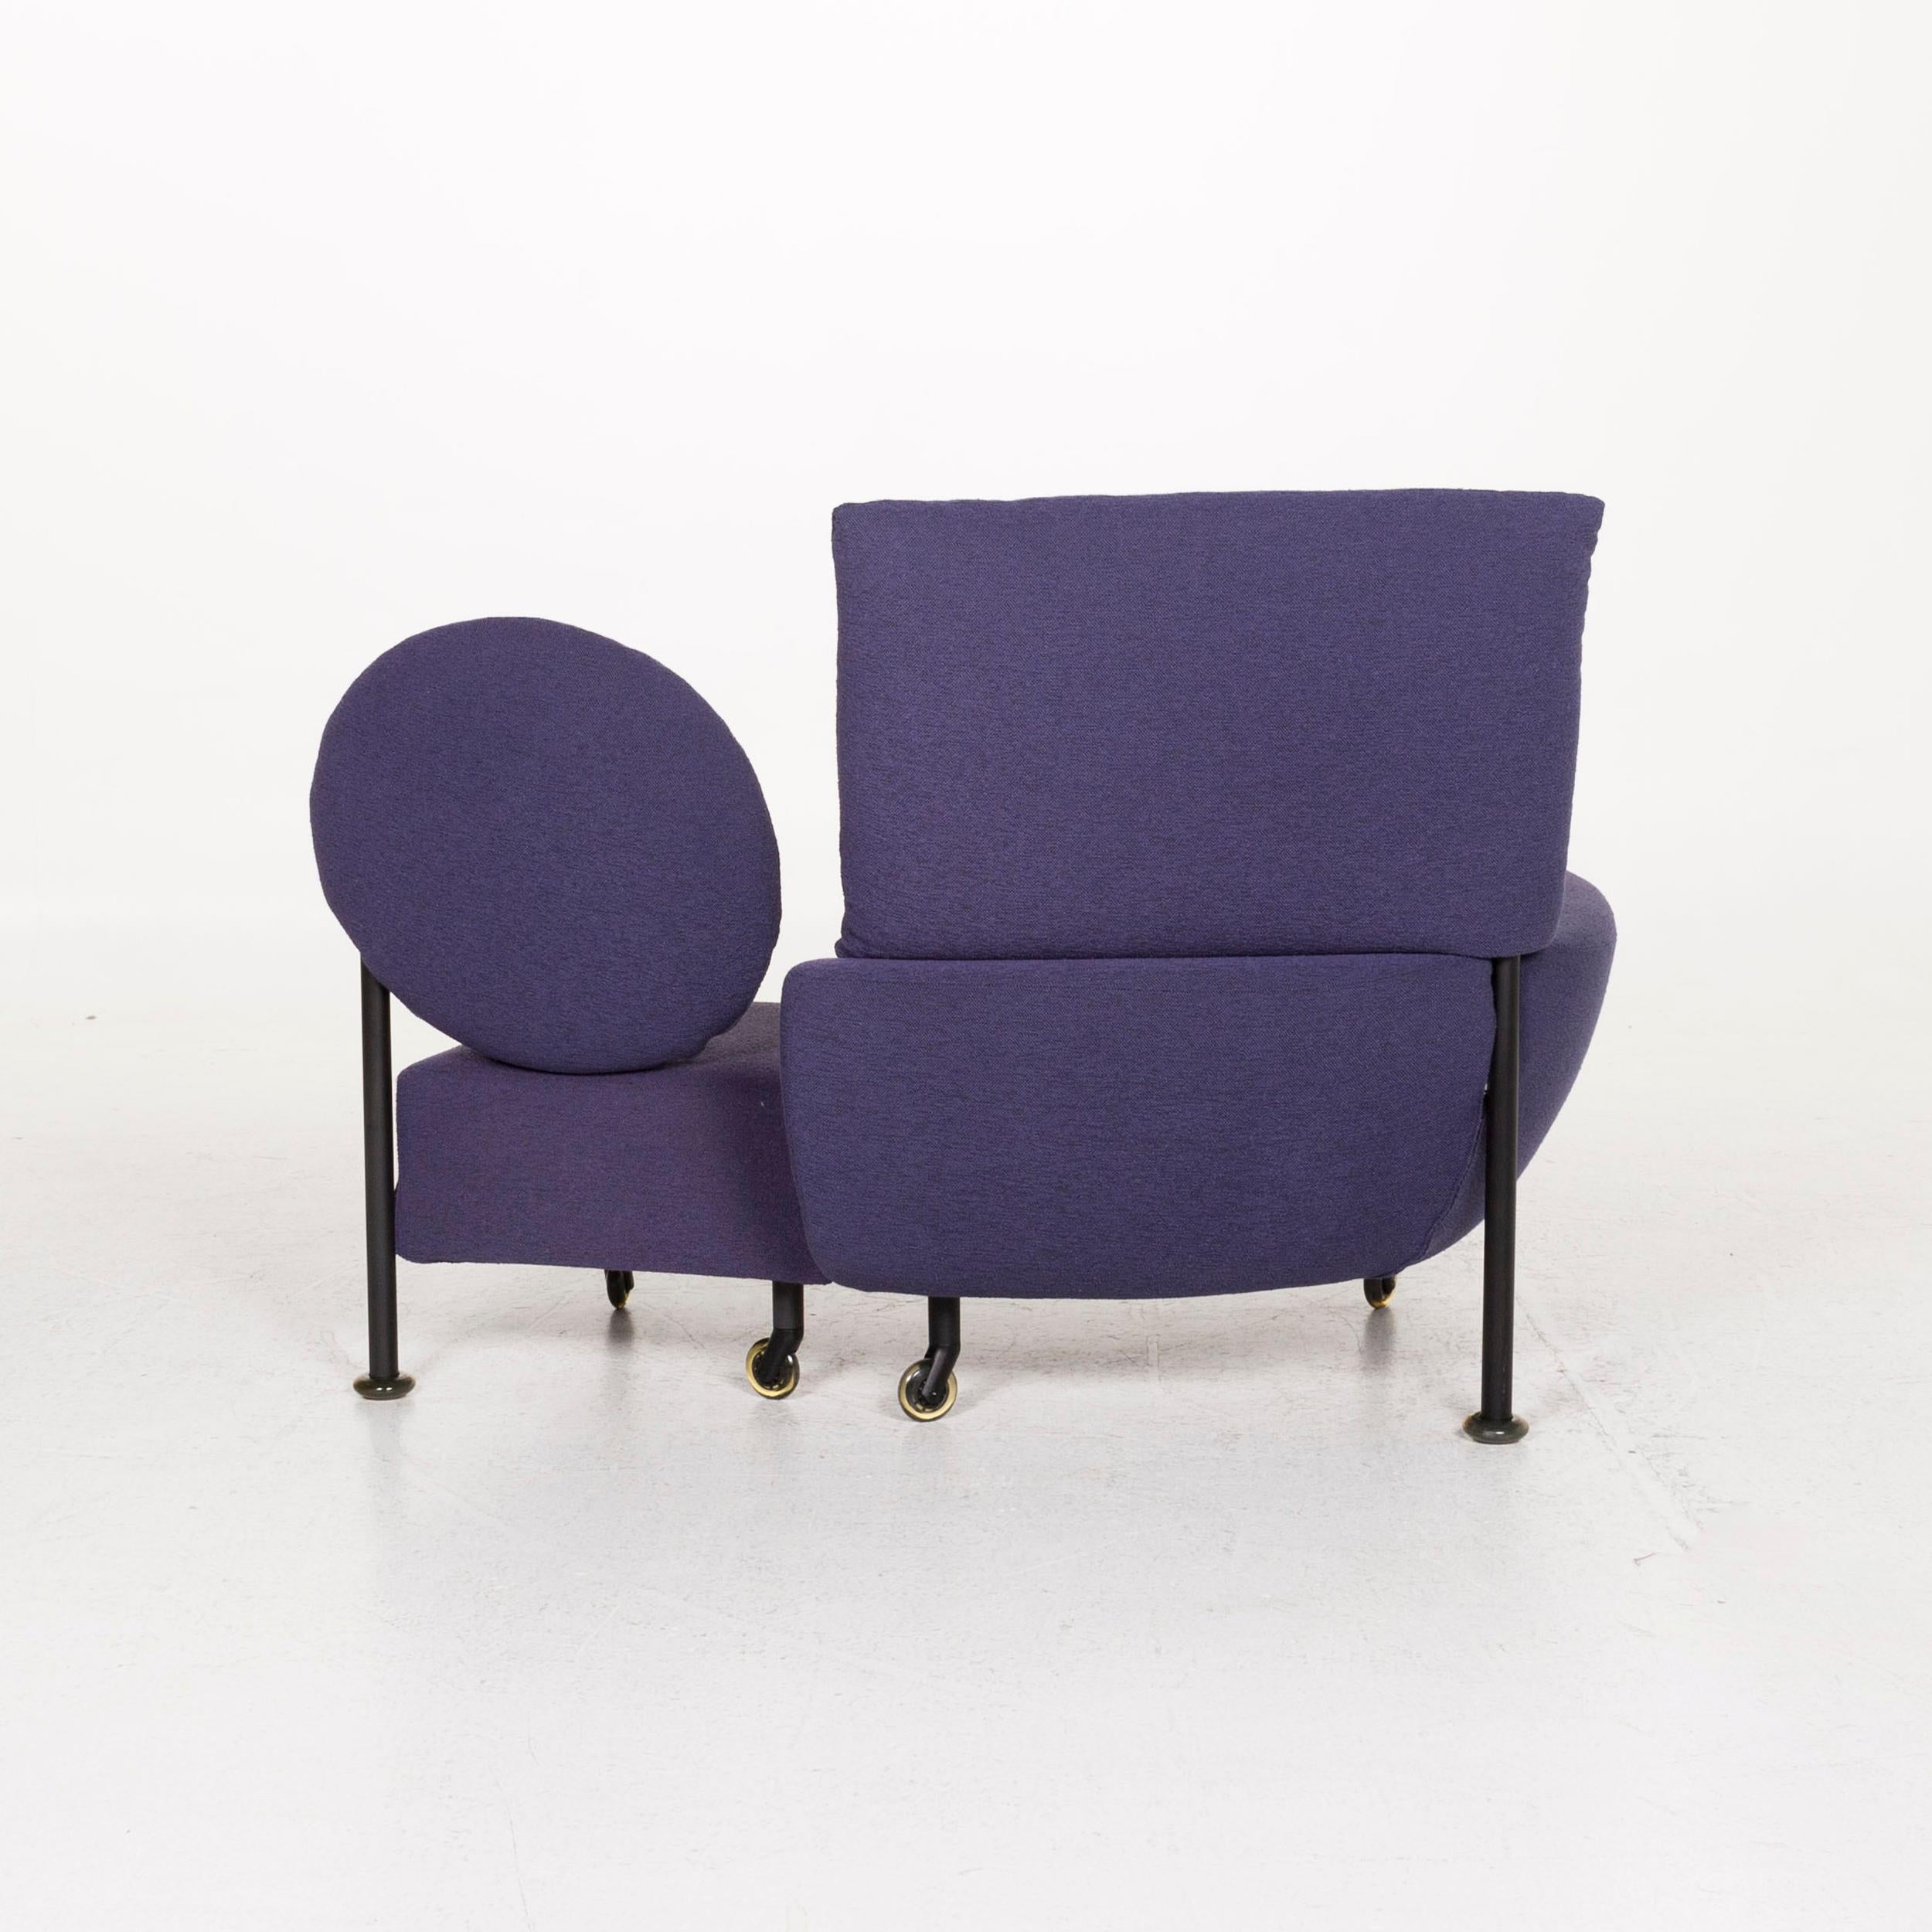 Cassina 290 TopKapi Fabric Sofa Violet Two-Seat Function Relax Function Couch 1